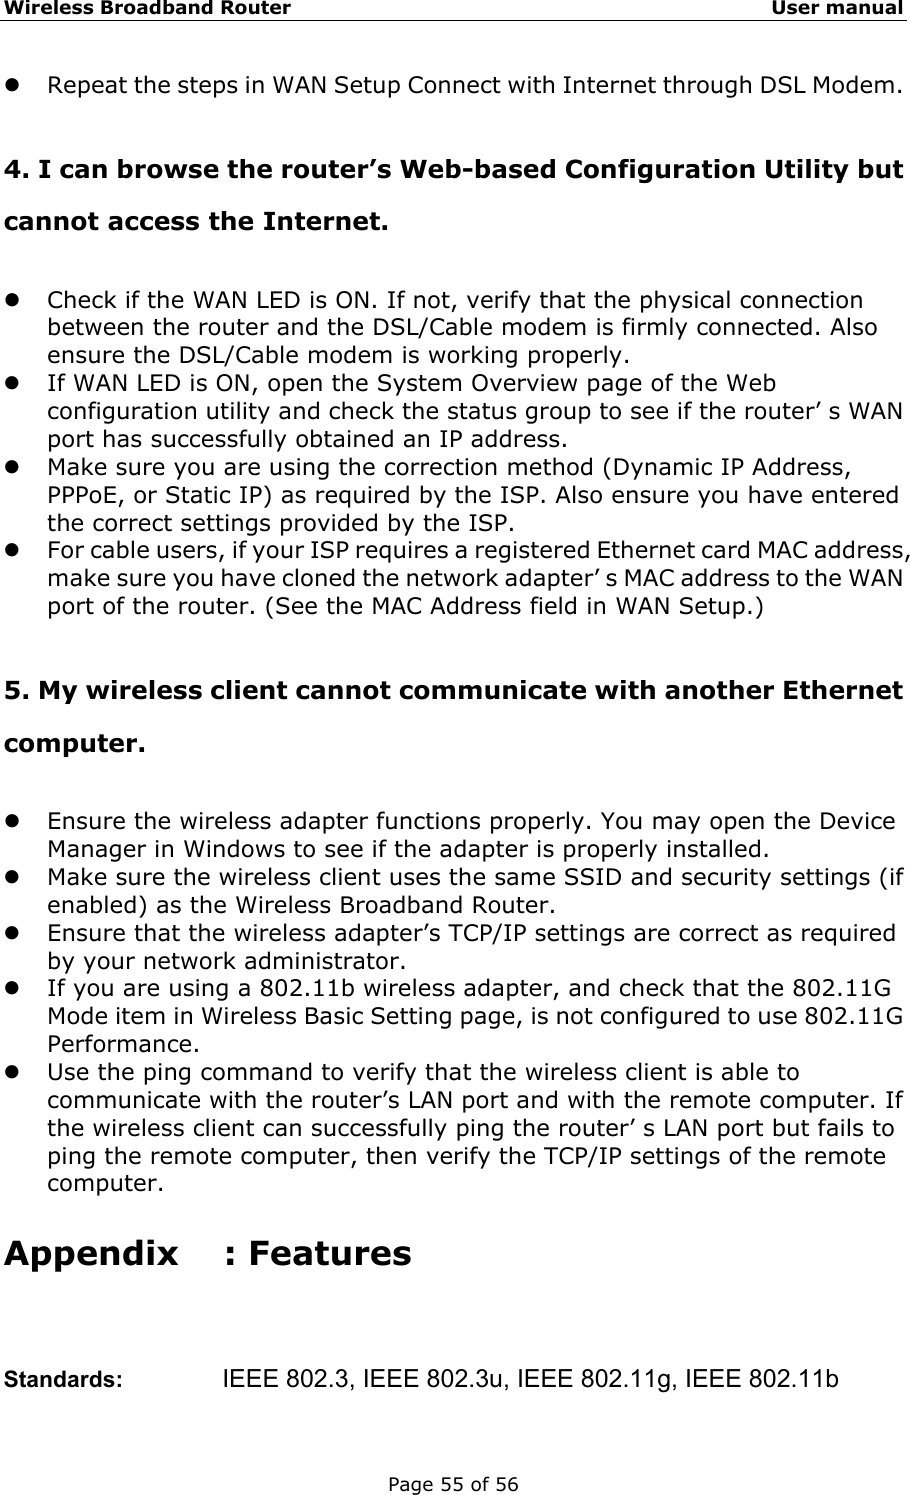 Wireless Broadband Router                                                   User manual Page 55 of 56 z Repeat the steps in WAN Setup Connect with Internet through DSL Modem.  4. I can browse the router’s Web-based Configuration Utility but cannot access the Internet. z Check if the WAN LED is ON. If not, verify that the physical connection between the router and the DSL/Cable modem is firmly connected. Also ensure the DSL/Cable modem is working properly. z If WAN LED is ON, open the System Overview page of the Web configuration utility and check the status group to see if the router’ s WAN port has successfully obtained an IP address. z Make sure you are using the correction method (Dynamic IP Address, PPPoE, or Static IP) as required by the ISP. Also ensure you have entered the correct settings provided by the ISP. z For cable users, if your ISP requires a registered Ethernet card MAC address, make sure you have cloned the network adapter’ s MAC address to the WAN port of the router. (See the MAC Address field in WAN Setup.)  5. My wireless client cannot communicate with another Ethernet computer. z Ensure the wireless adapter functions properly. You may open the Device Manager in Windows to see if the adapter is properly installed. z Make sure the wireless client uses the same SSID and security settings (if enabled) as the Wireless Broadband Router. z Ensure that the wireless adapter’s TCP/IP settings are correct as required by your network administrator. z If you are using a 802.11b wireless adapter, and check that the 802.11G Mode item in Wireless Basic Setting page, is not configured to use 802.11G Performance. z Use the ping command to verify that the wireless client is able to communicate with the router’s LAN port and with the remote computer. If the wireless client can successfully ping the router’ s LAN port but fails to ping the remote computer, then verify the TCP/IP settings of the remote computer. Appendix : Features Standards:     IEEE 802.3, IEEE 802.3u, IEEE 802.11g, IEEE 802.11b 